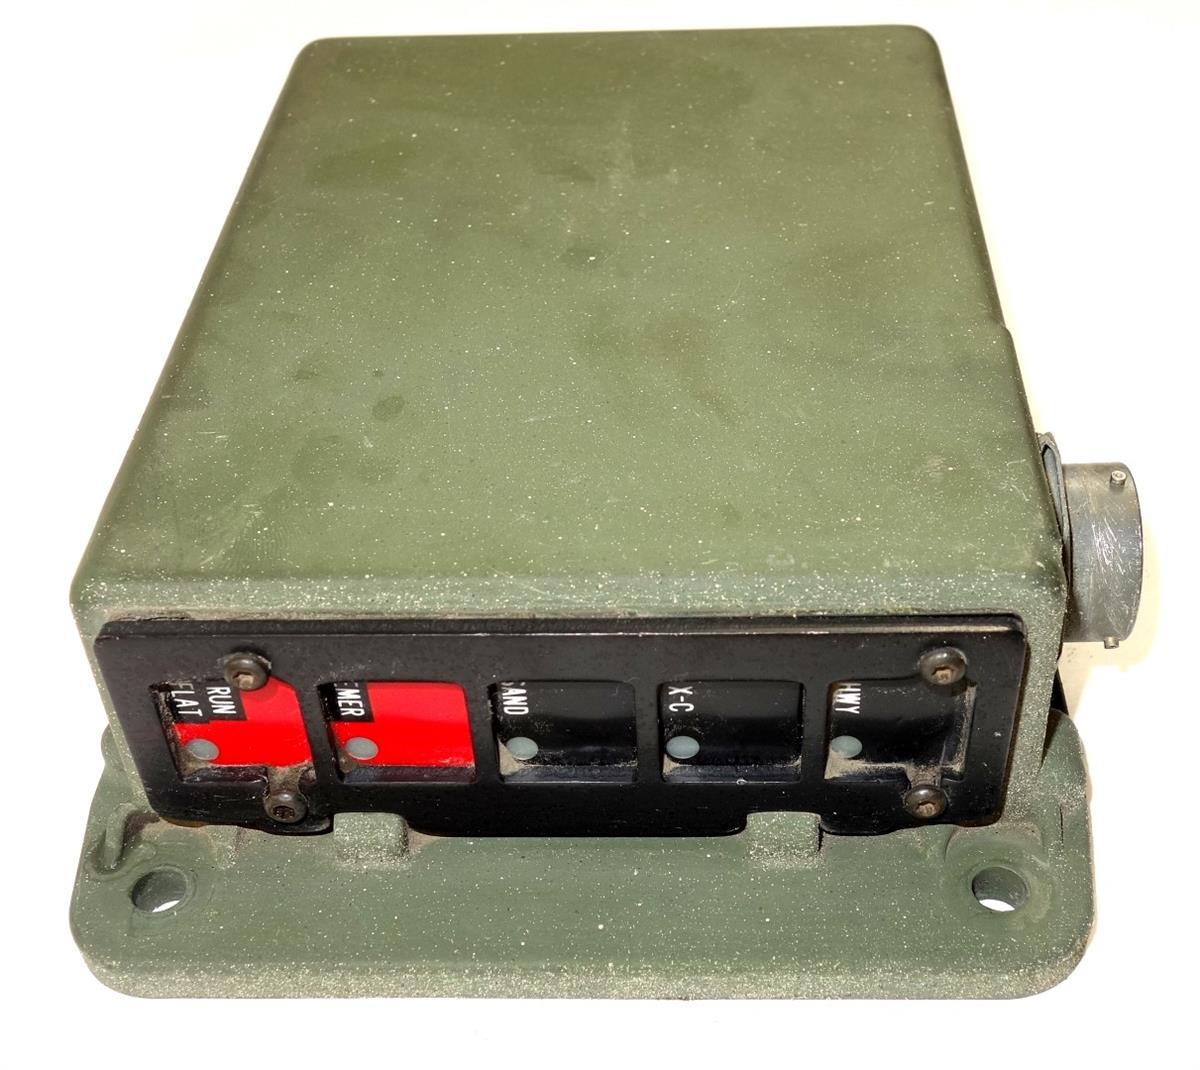 9M-1869 | 6110-01-268-8739 CTIS ( Central Tire Inflation System) Electronic Control Unit  (5) (Large).JPG